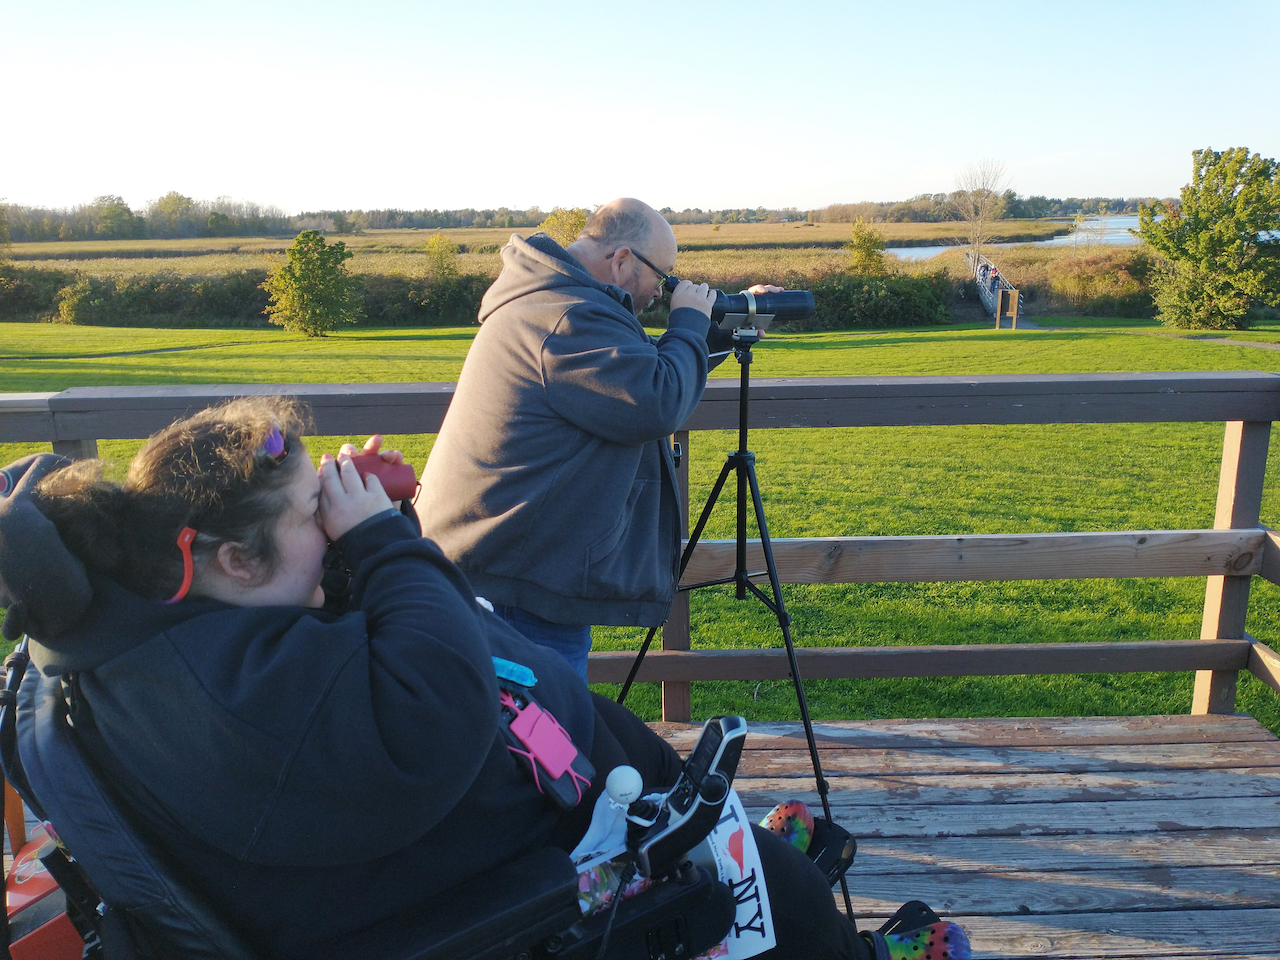 A woman using a monocular, seated in a power wheelchair and a man beside her on the viewing platform using a tripod and binoculars. A march and open grass area in the background.